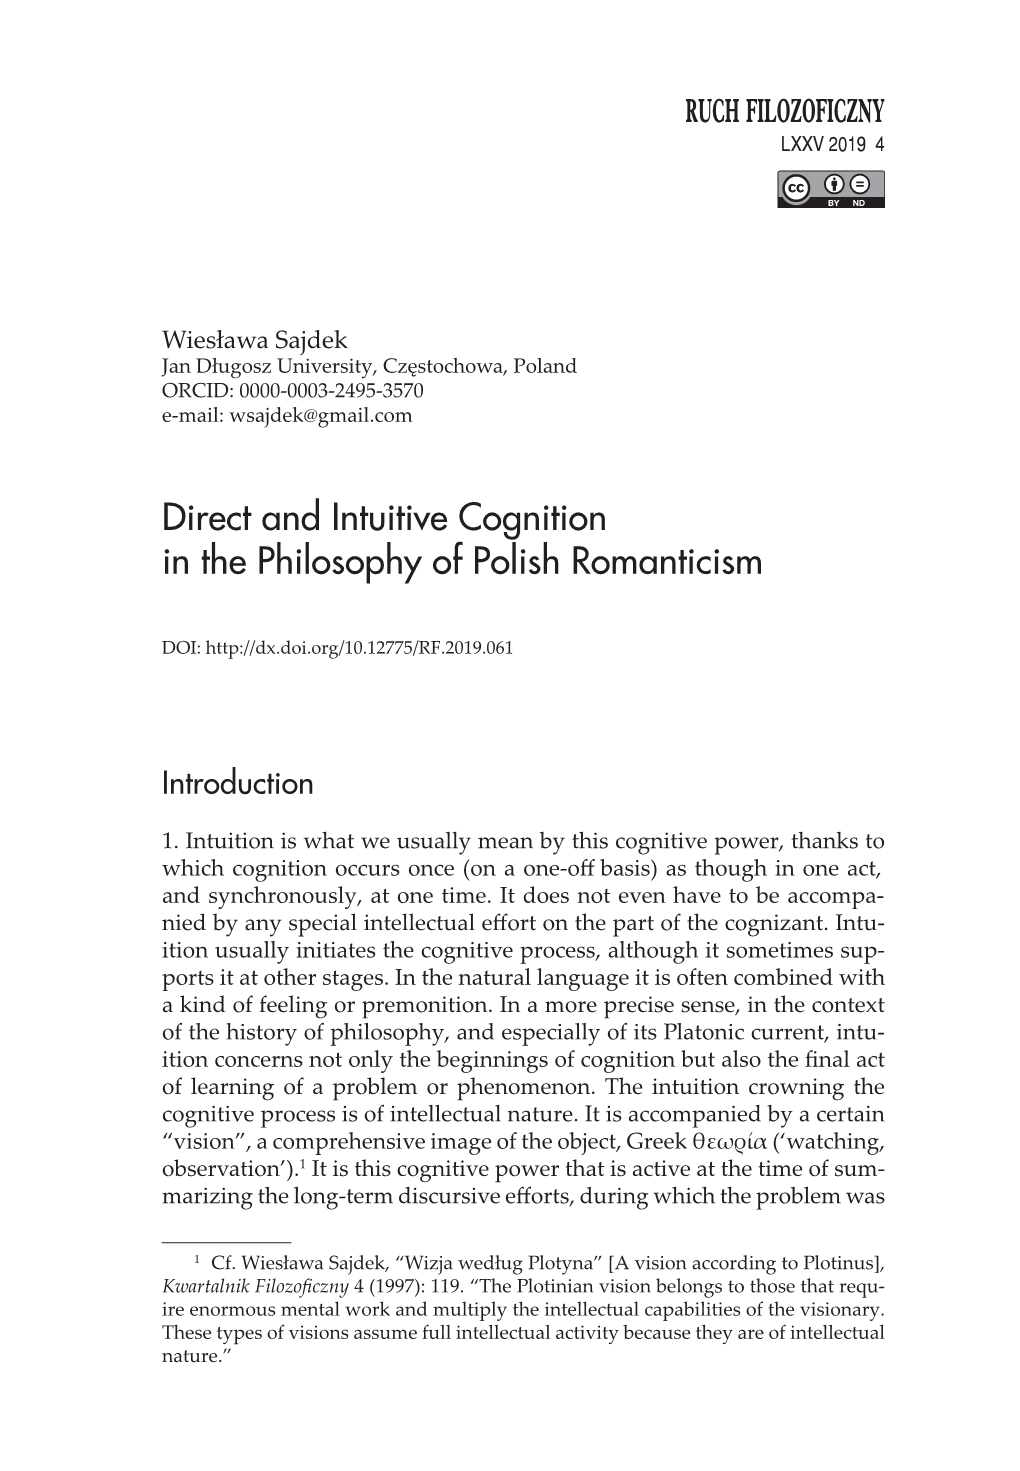 Direct and Intuitive Cognition in the Philosophy of Polish Romanticism